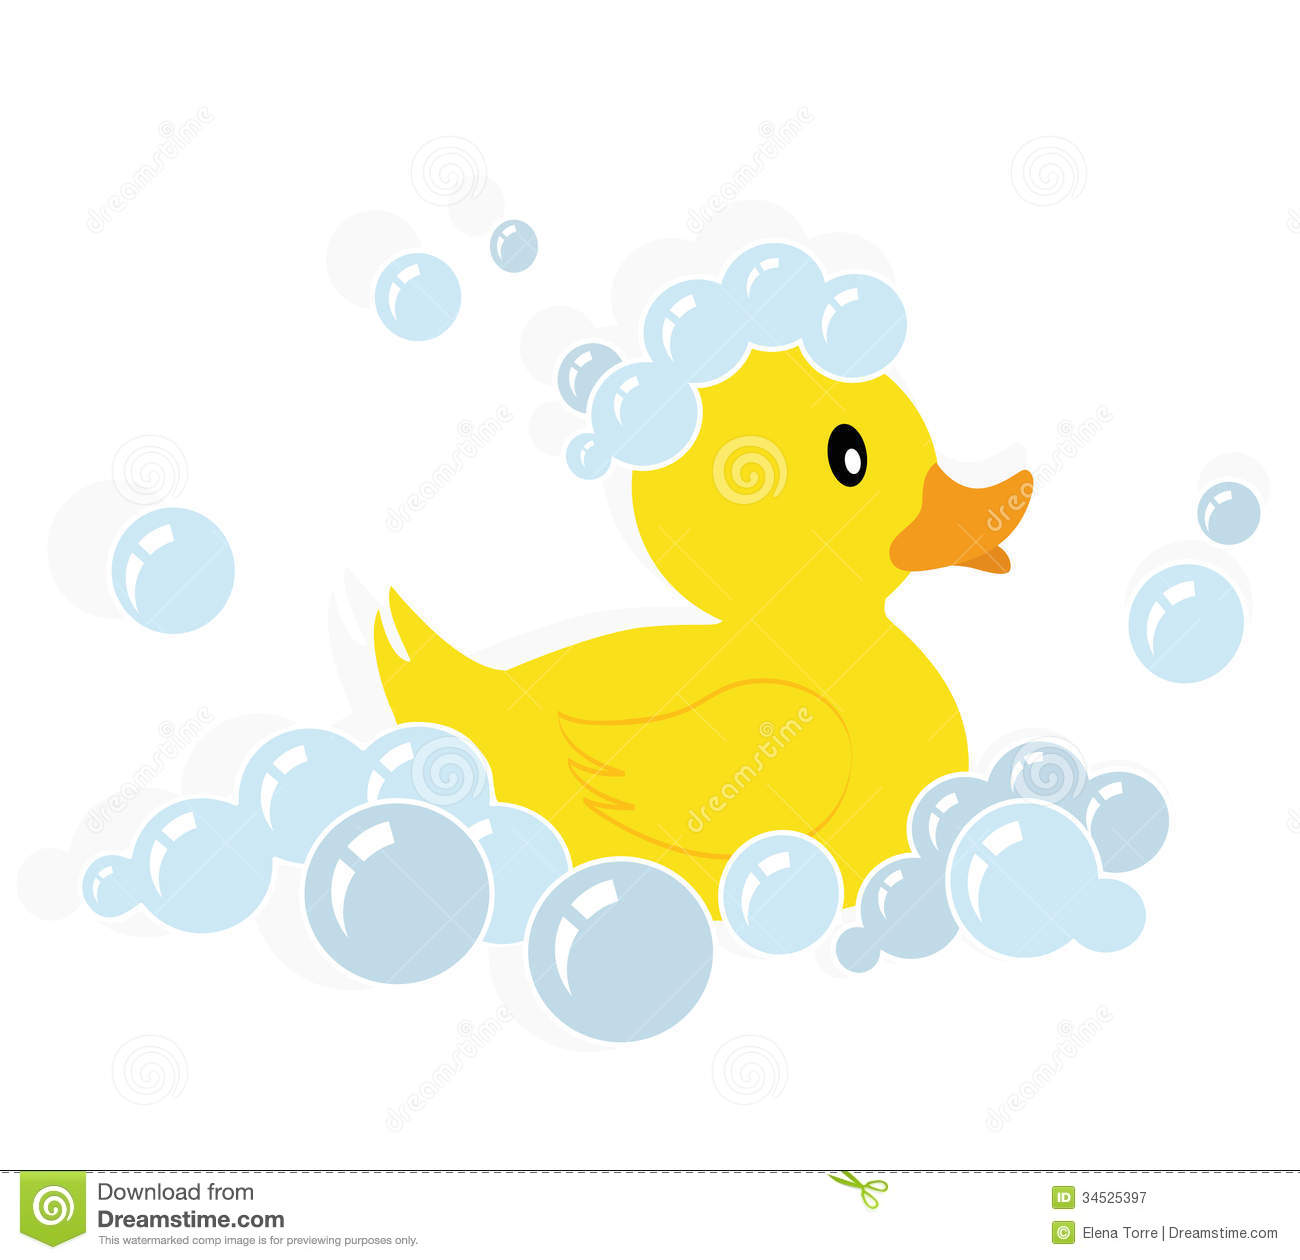 Rubber duck silhouette png